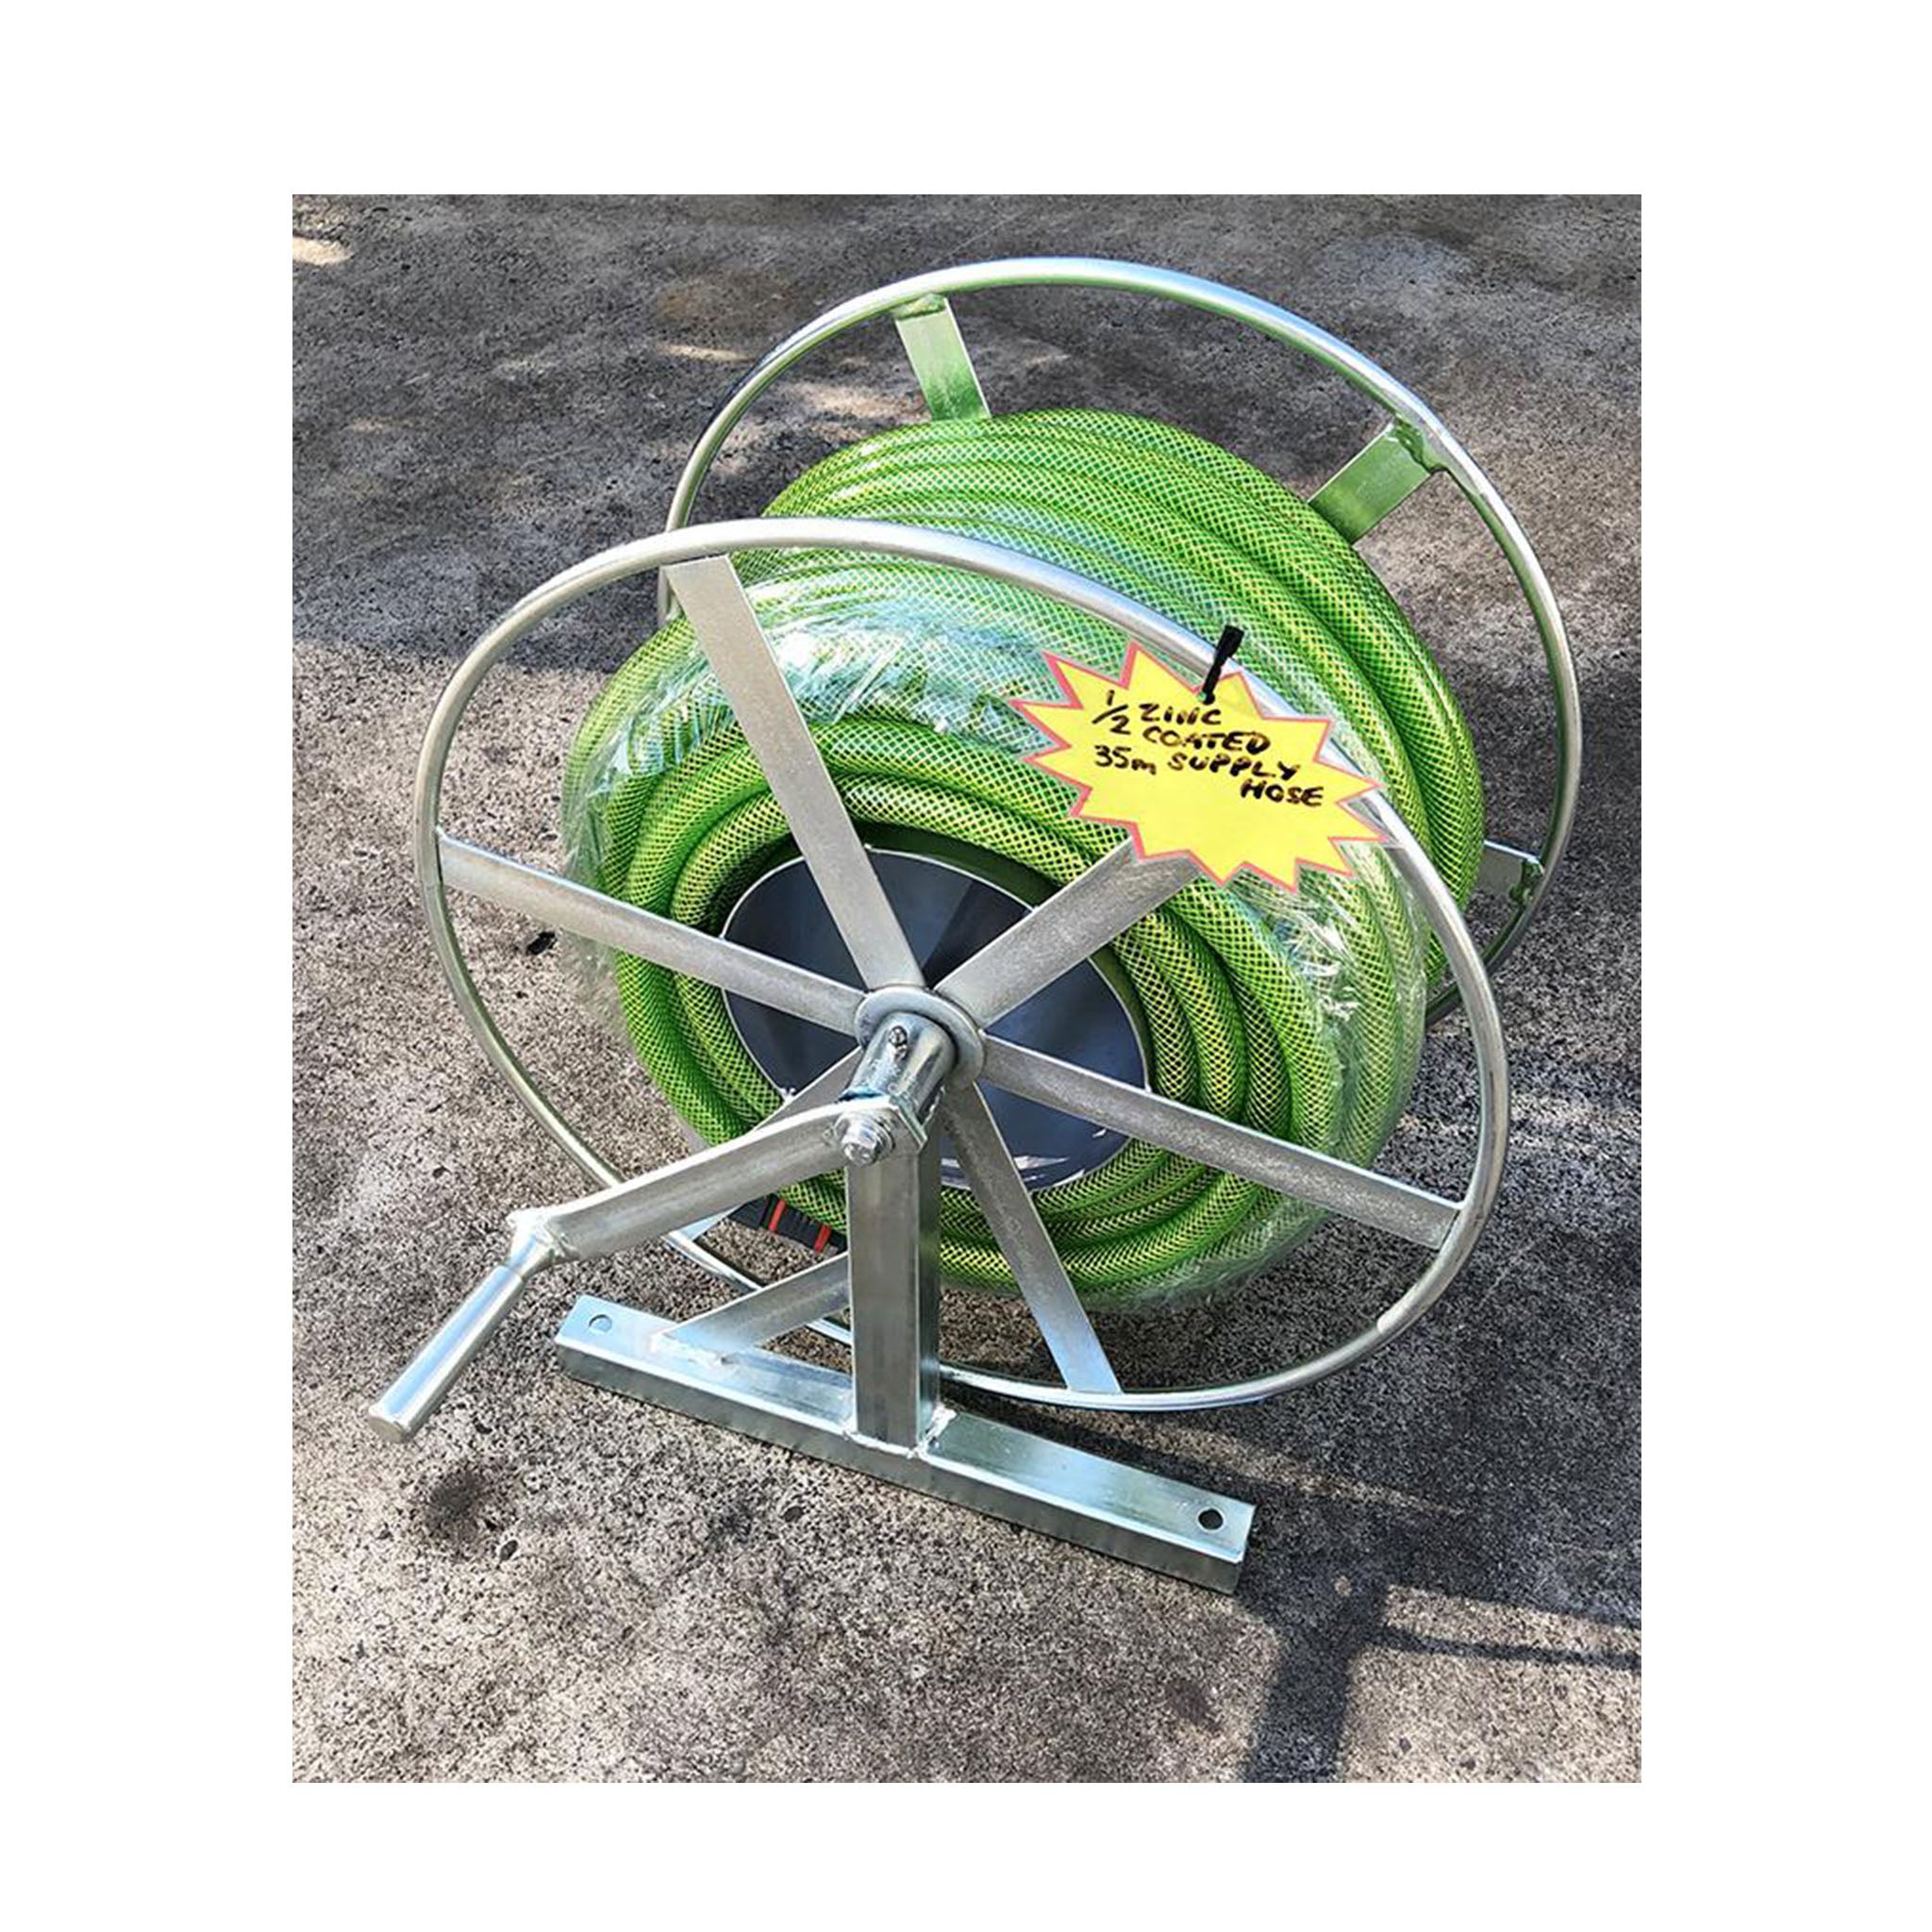 Galvanised Hose Reel 1/2 with 35m Hose - The Jetters Edge